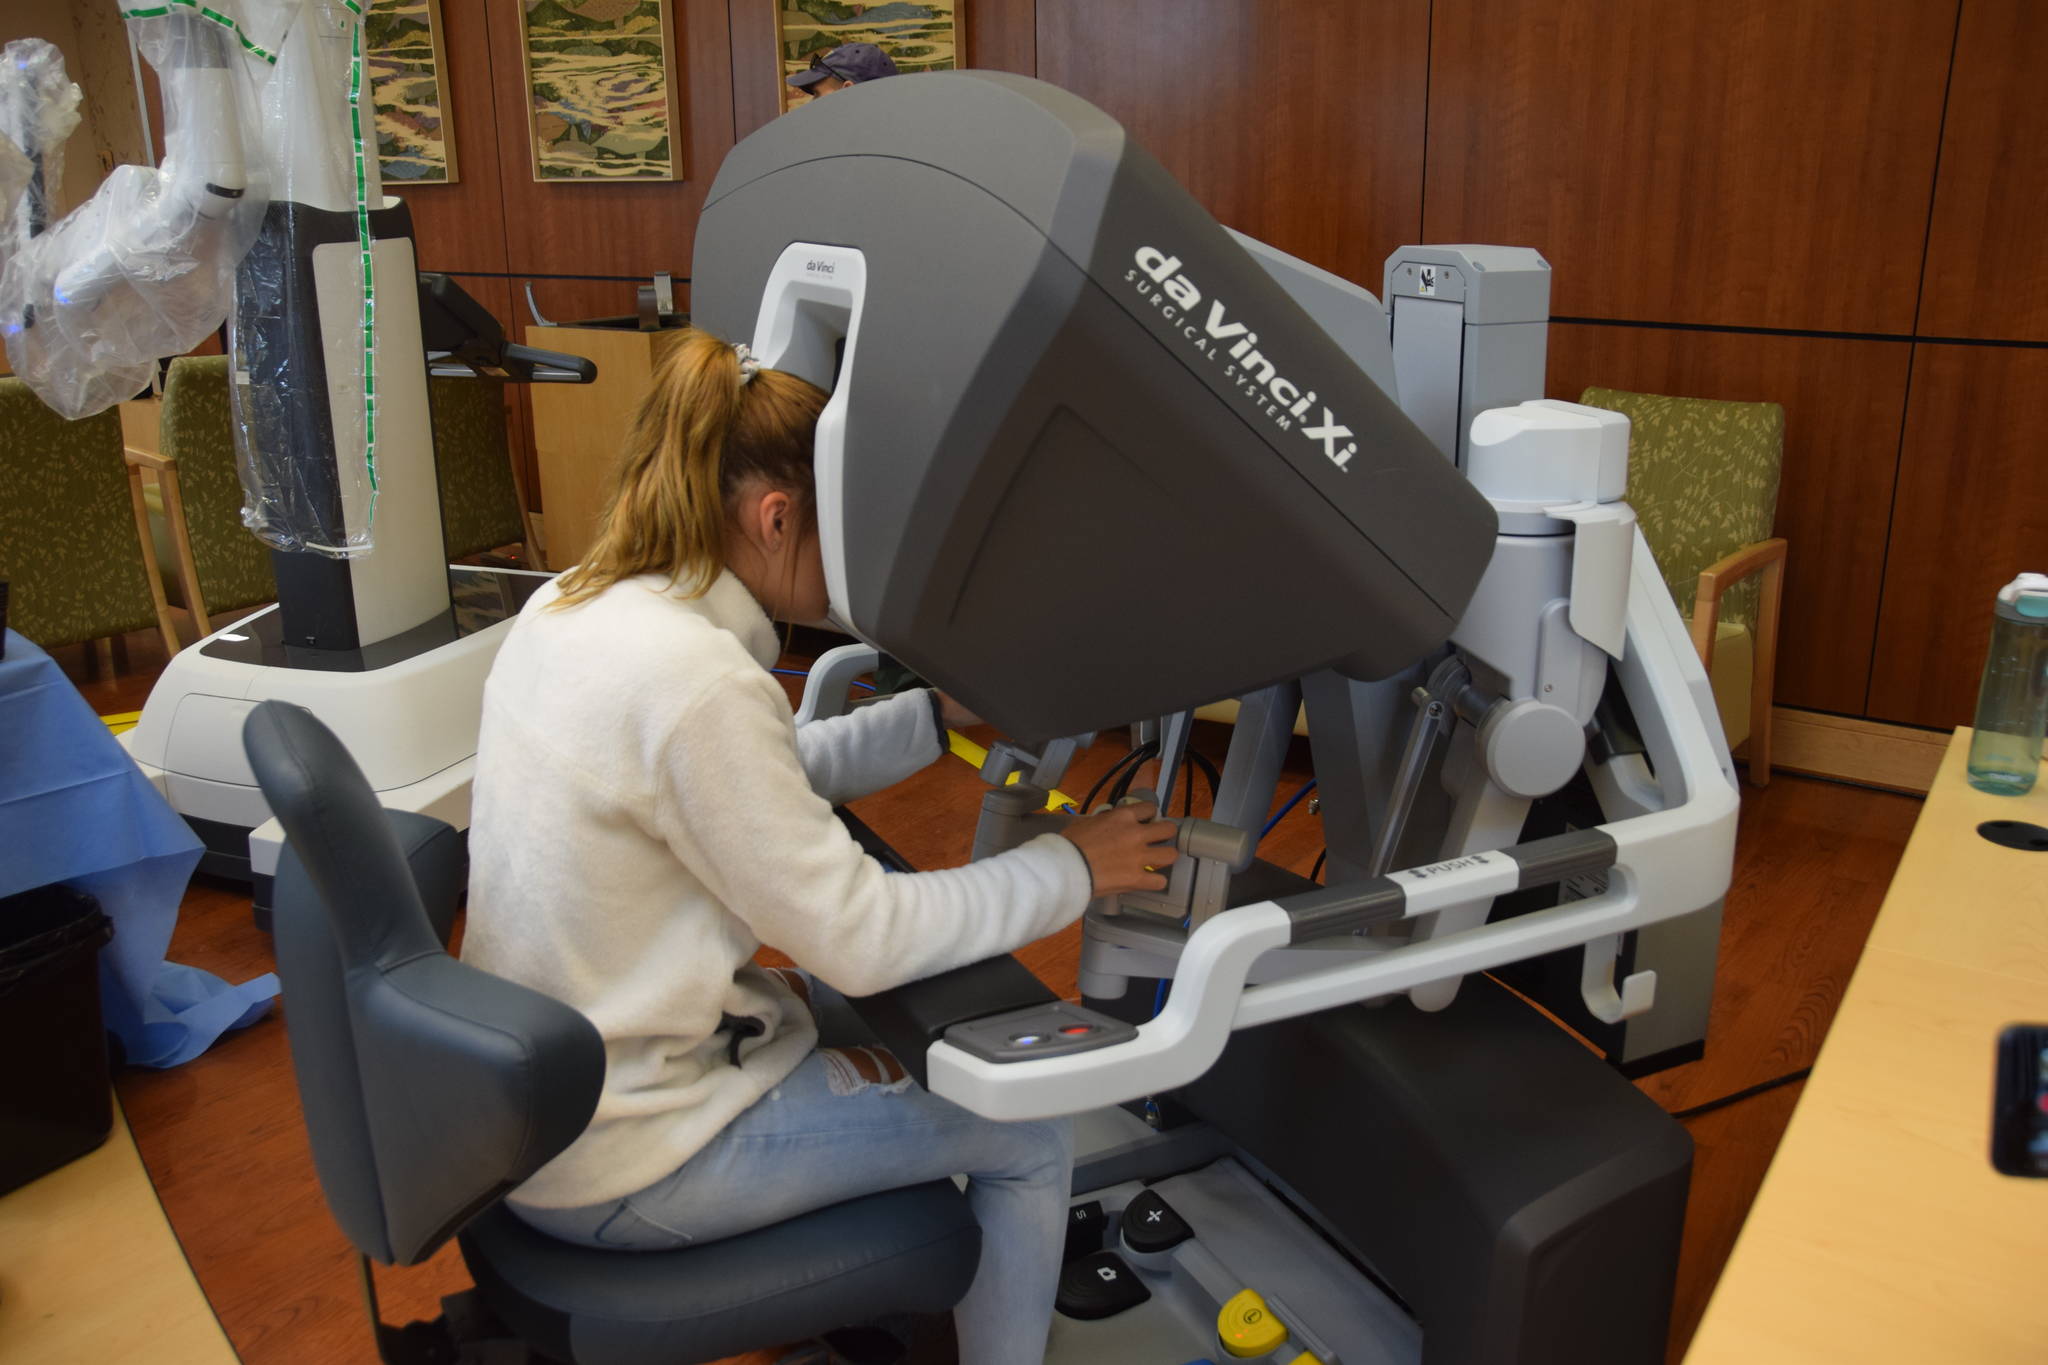 Peninsula resident Willow Kitchens tests out the Da Vinci Xi surgery robot during the Community Health Fair at Central Peninsula Hospital in Soldotna, Alaska, on March 23, 2019. (Photo by Brian Mazurek/Peninsula Clarion)